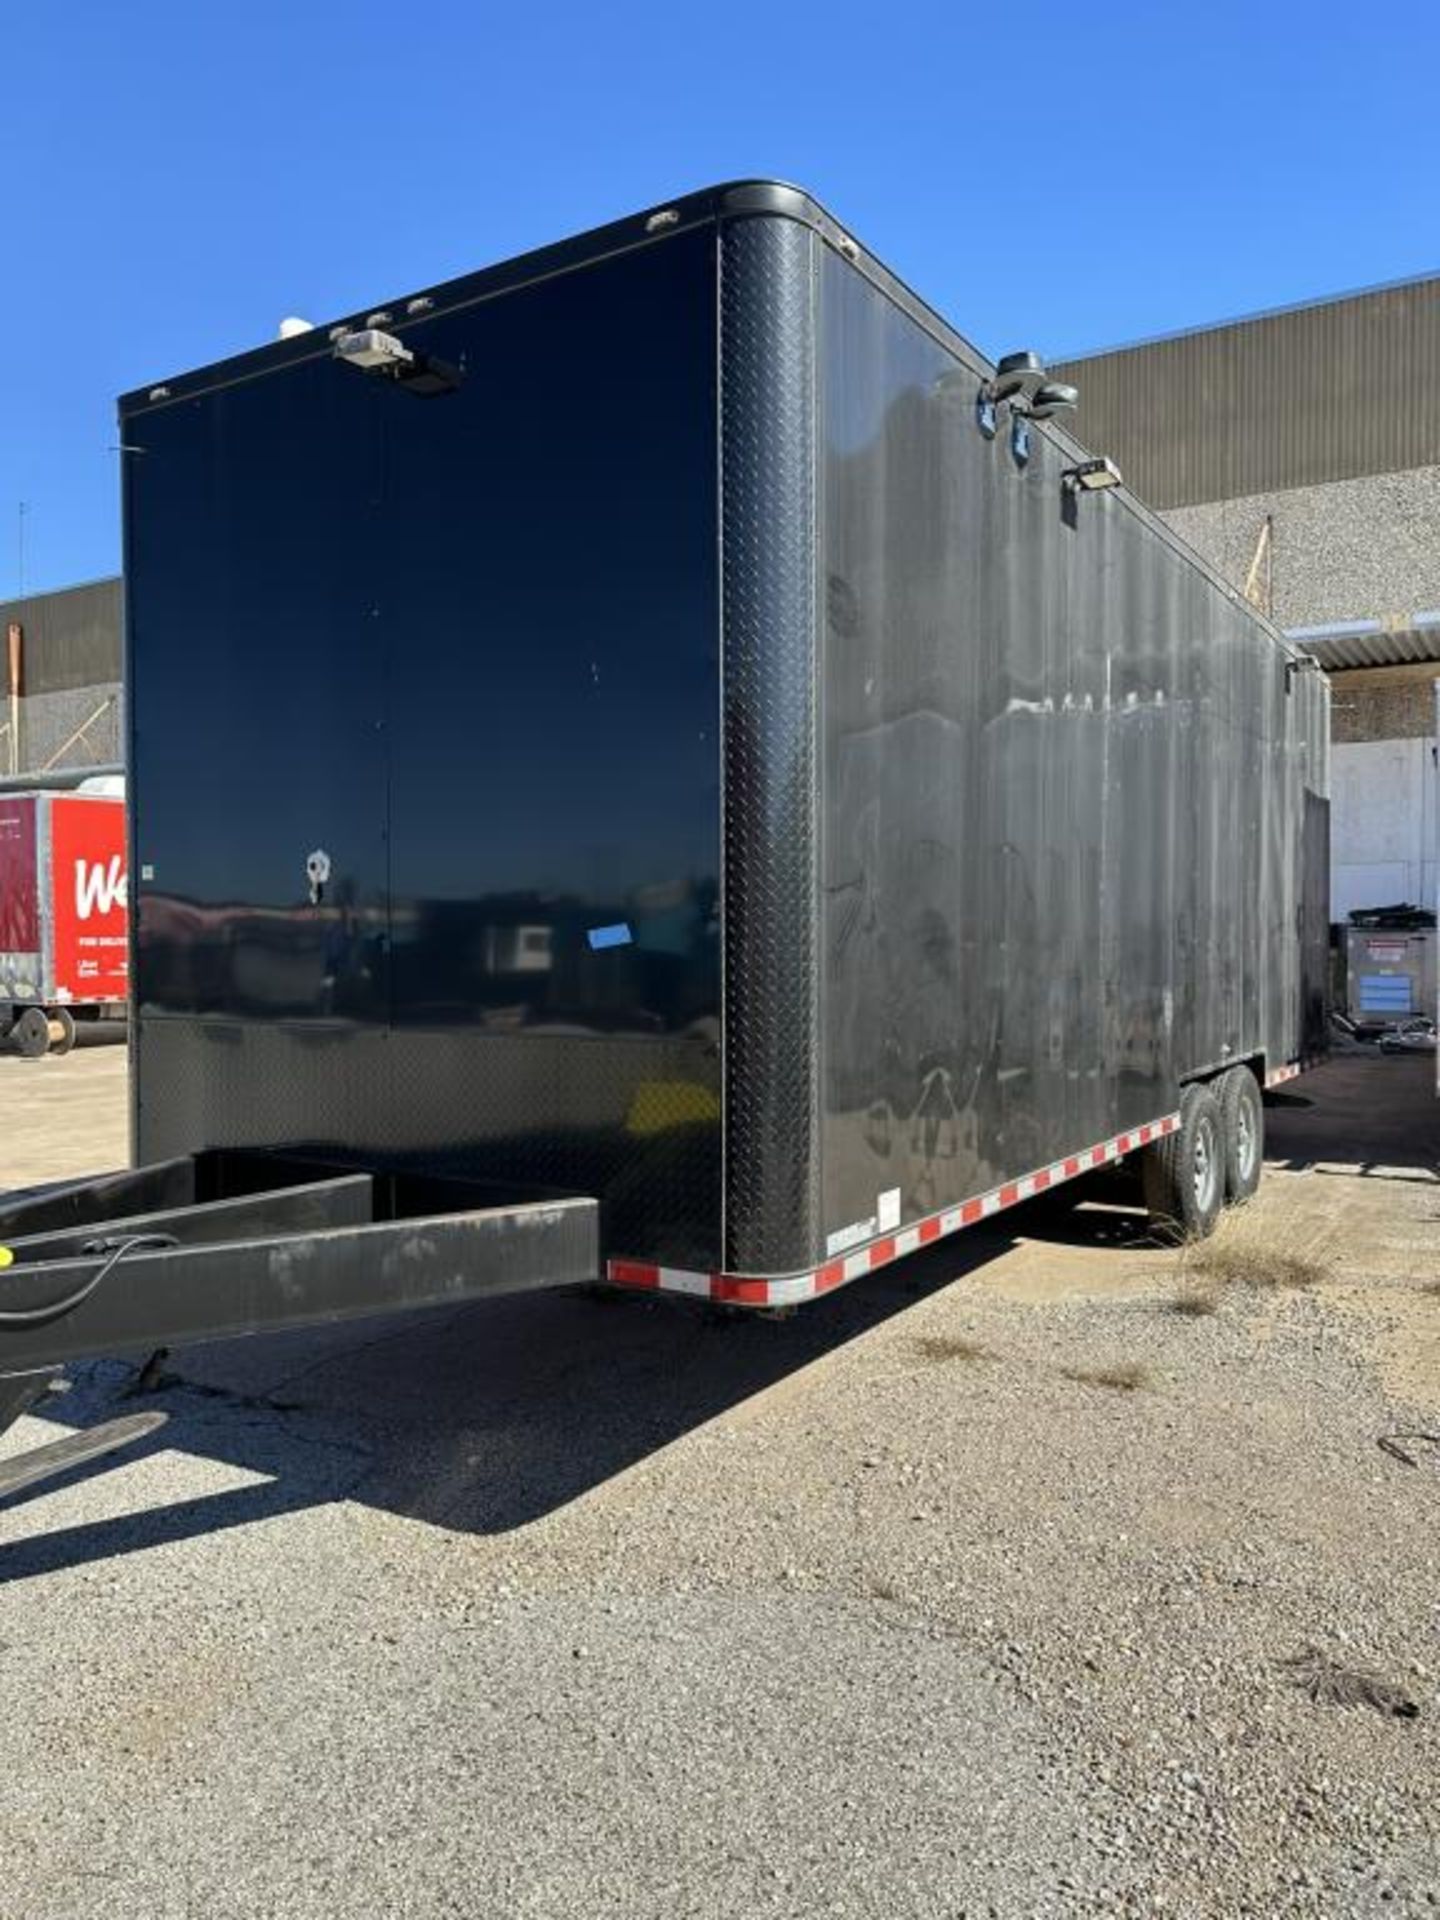 2021 Food Service Support Trailer - Image 6 of 18